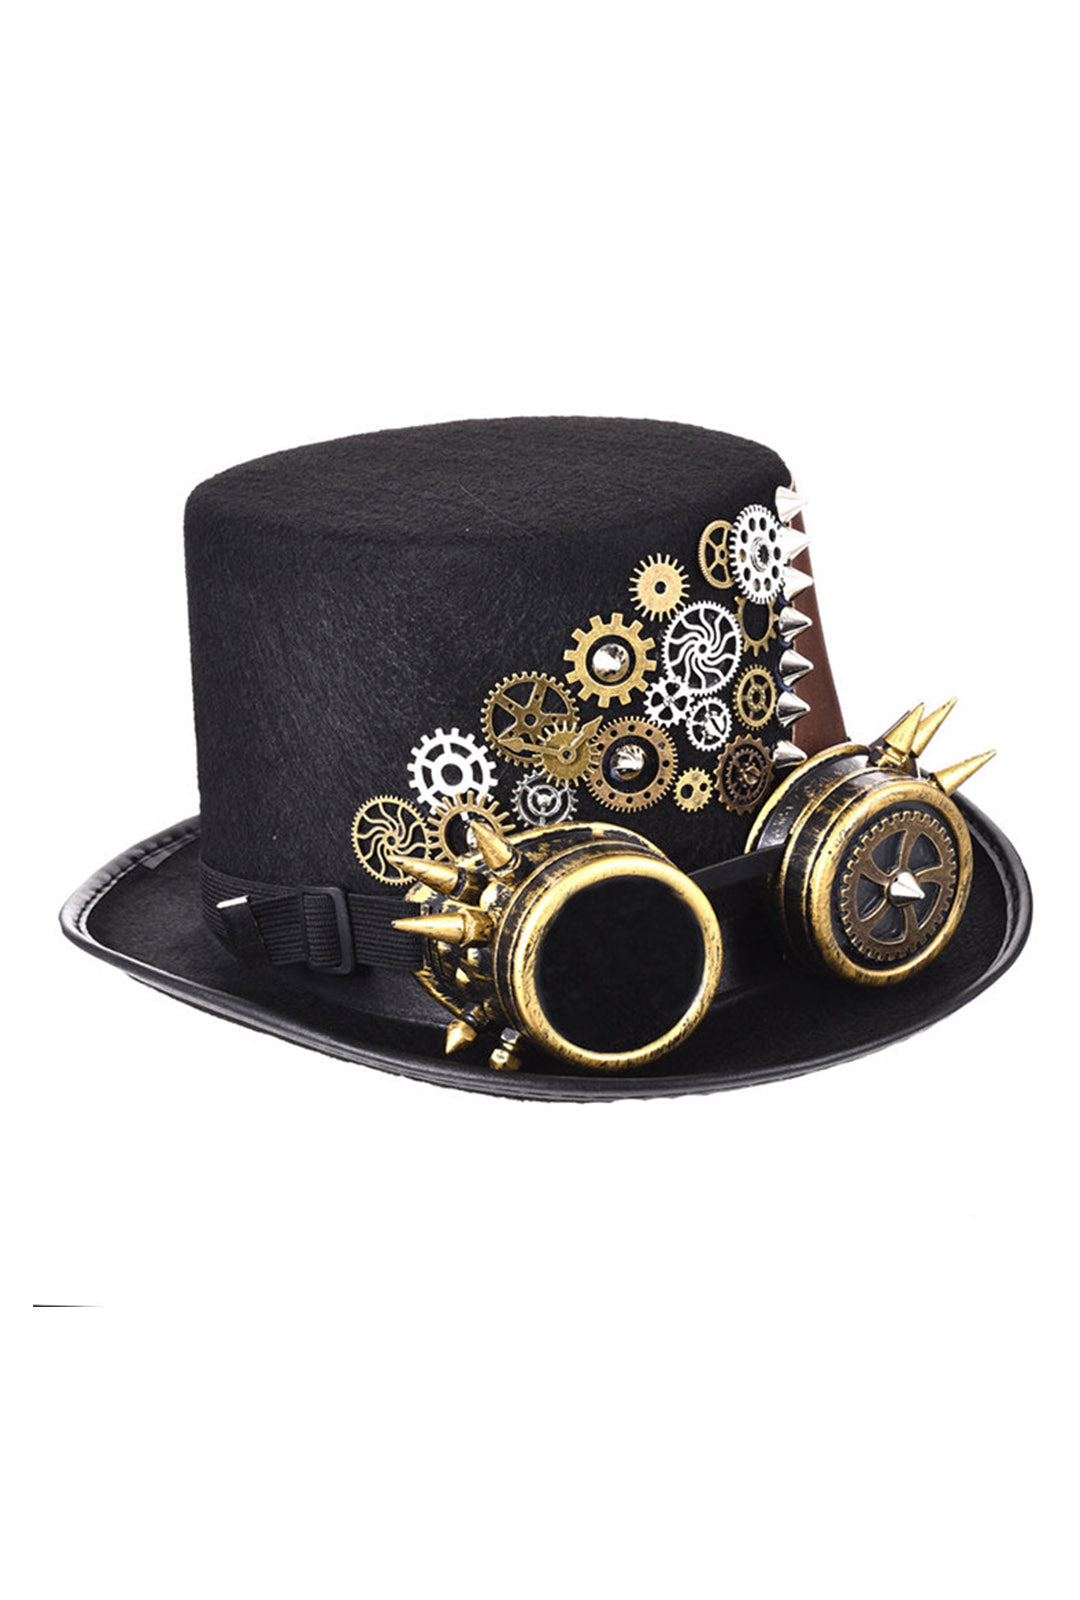 Steampunk Spikes & Cogs Goggles Hat (JJ)